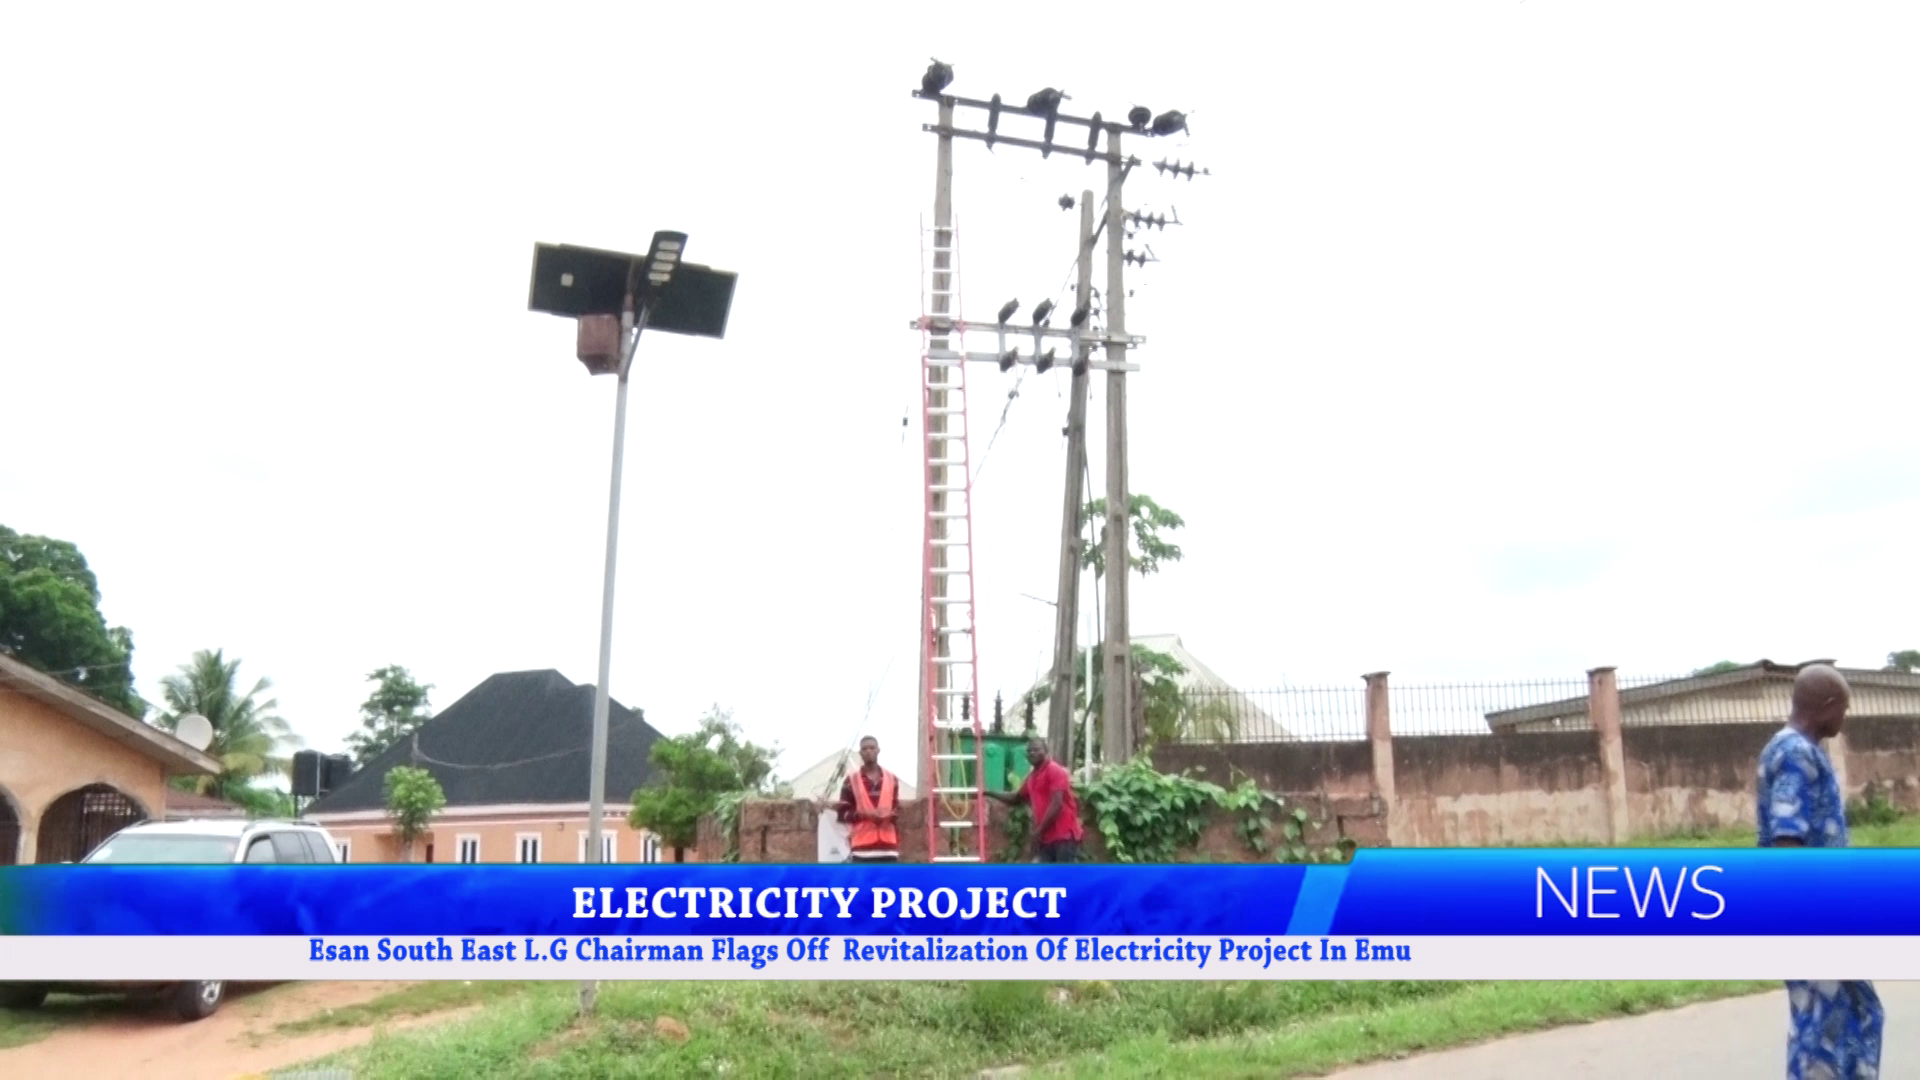 Esan South East L.G Chairman Flags Off Revitalization Of Electricity Project In Emu